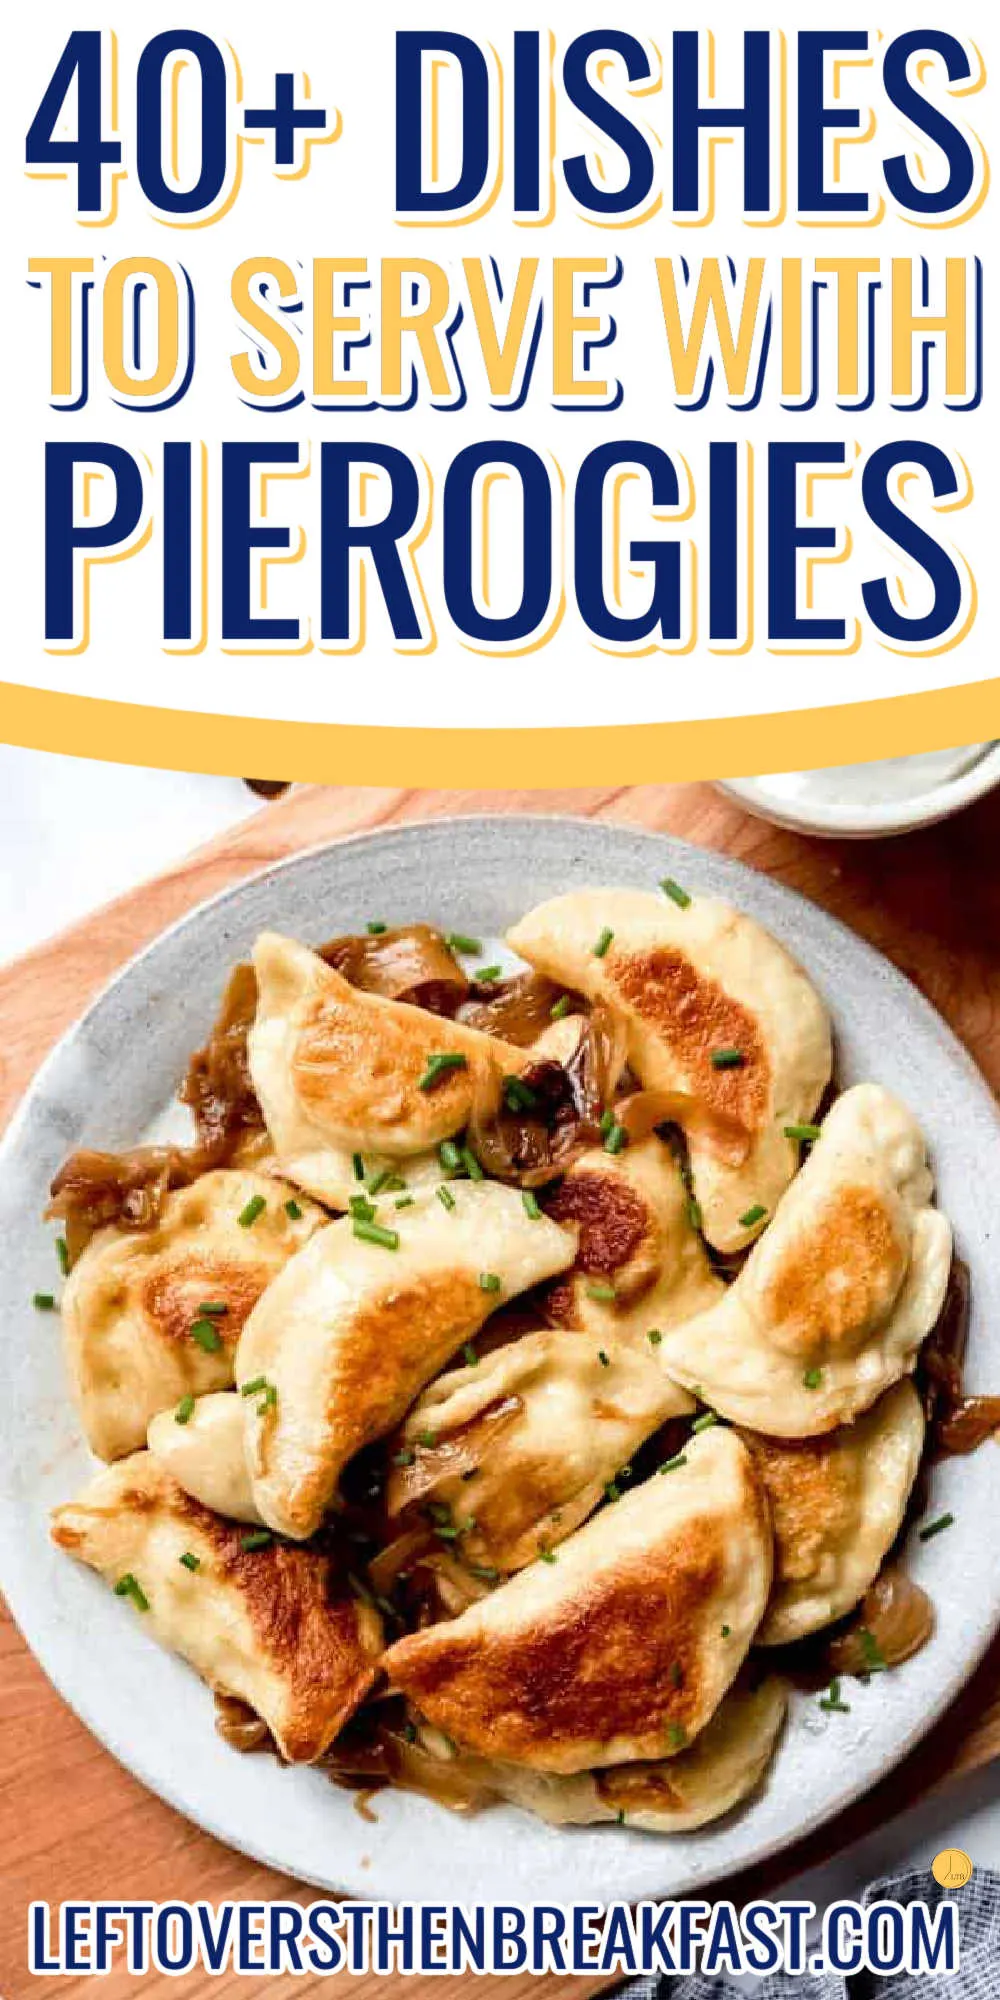 plate of pierogies with a yellow stripe and text "what to serve with pierogies"